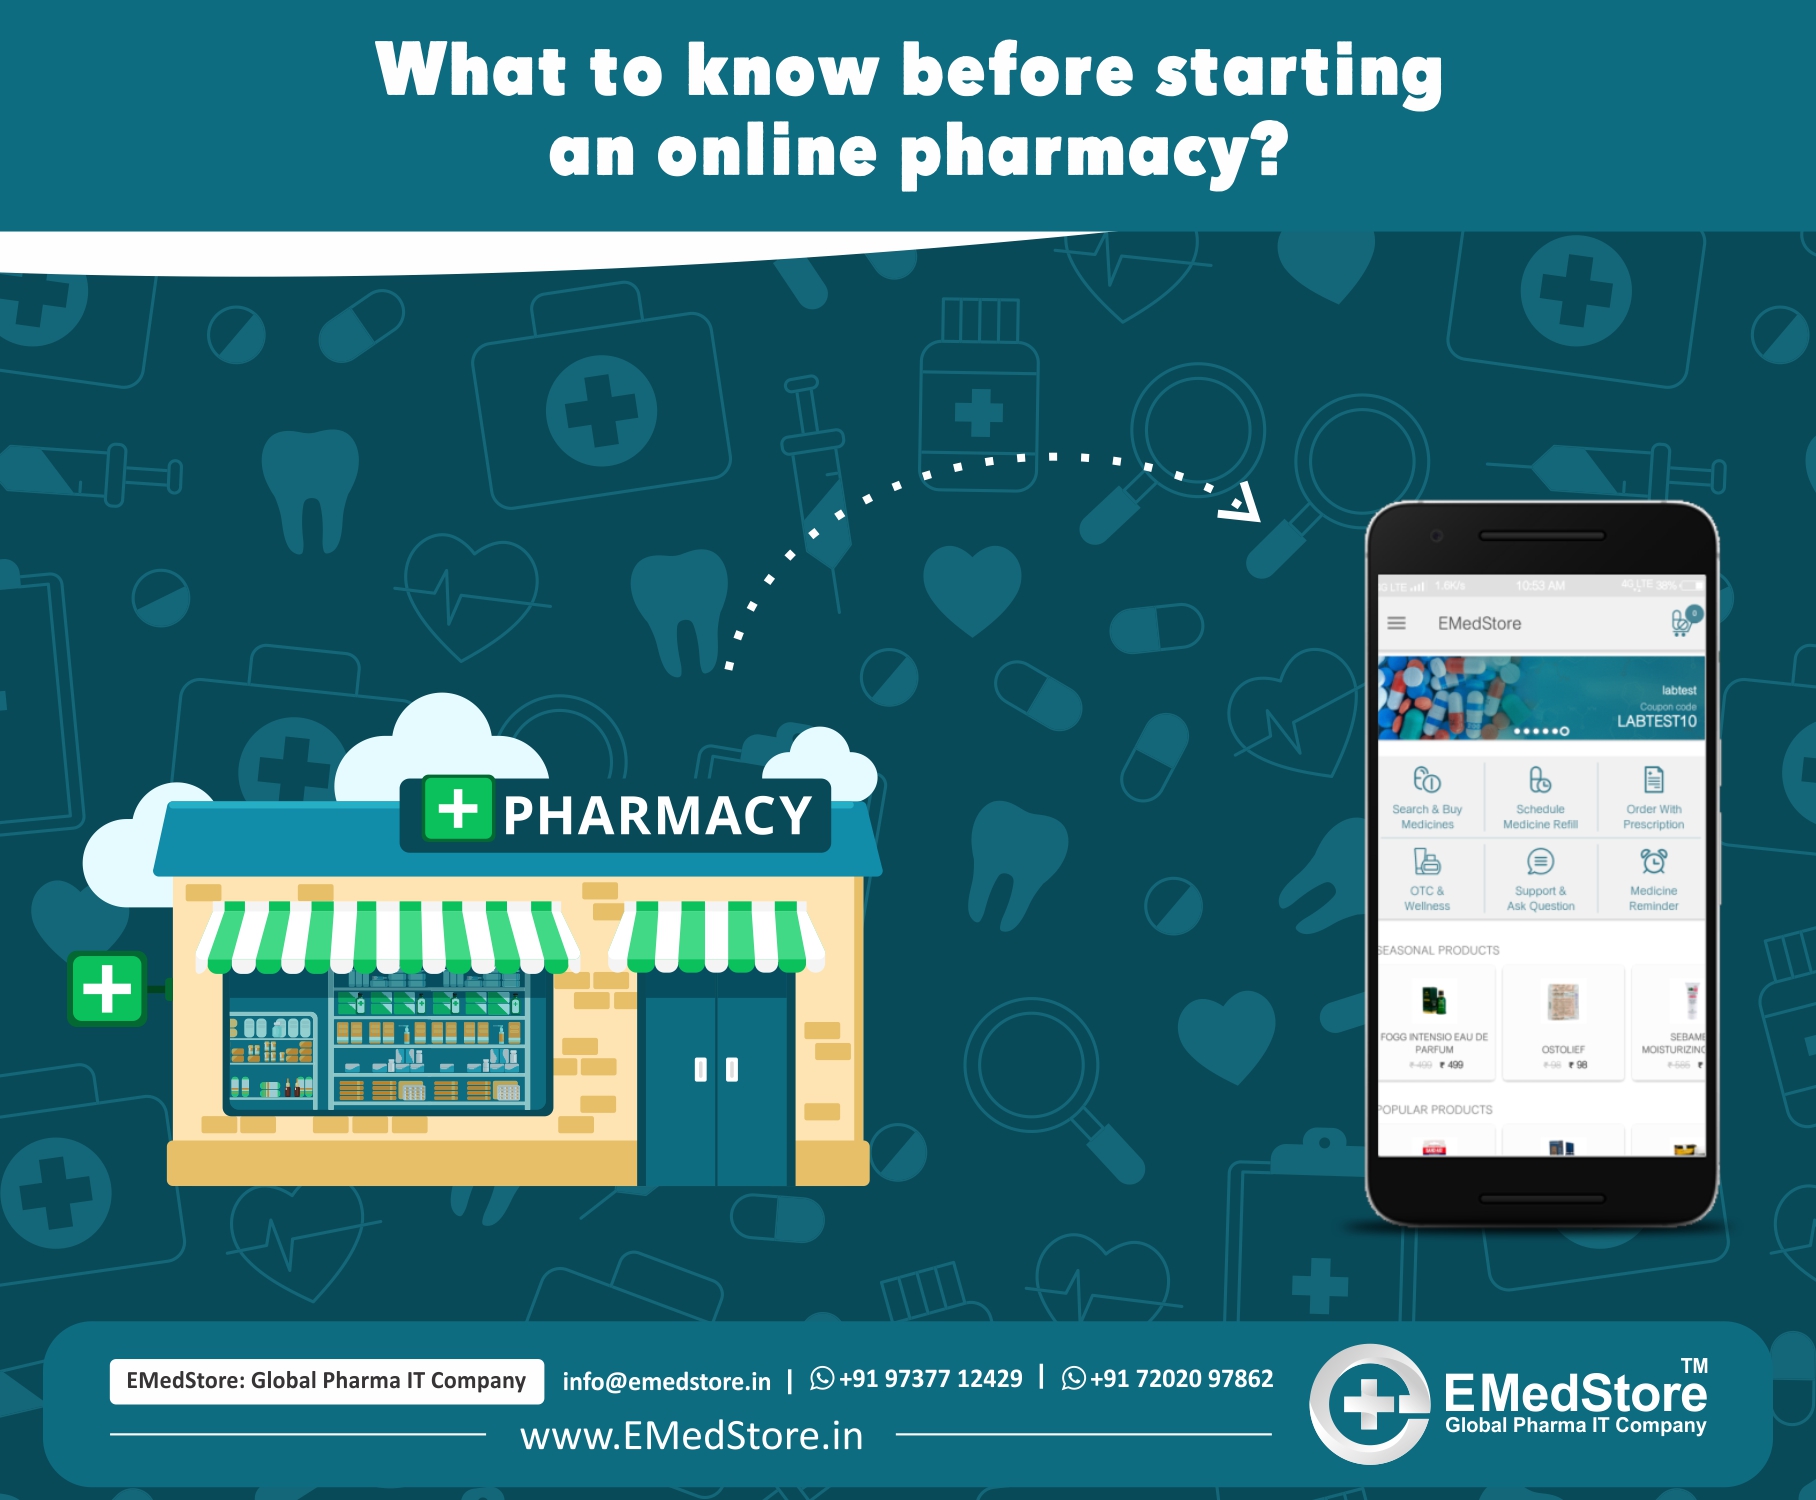 Who can help pharmacists to start online pharmacy at low price?